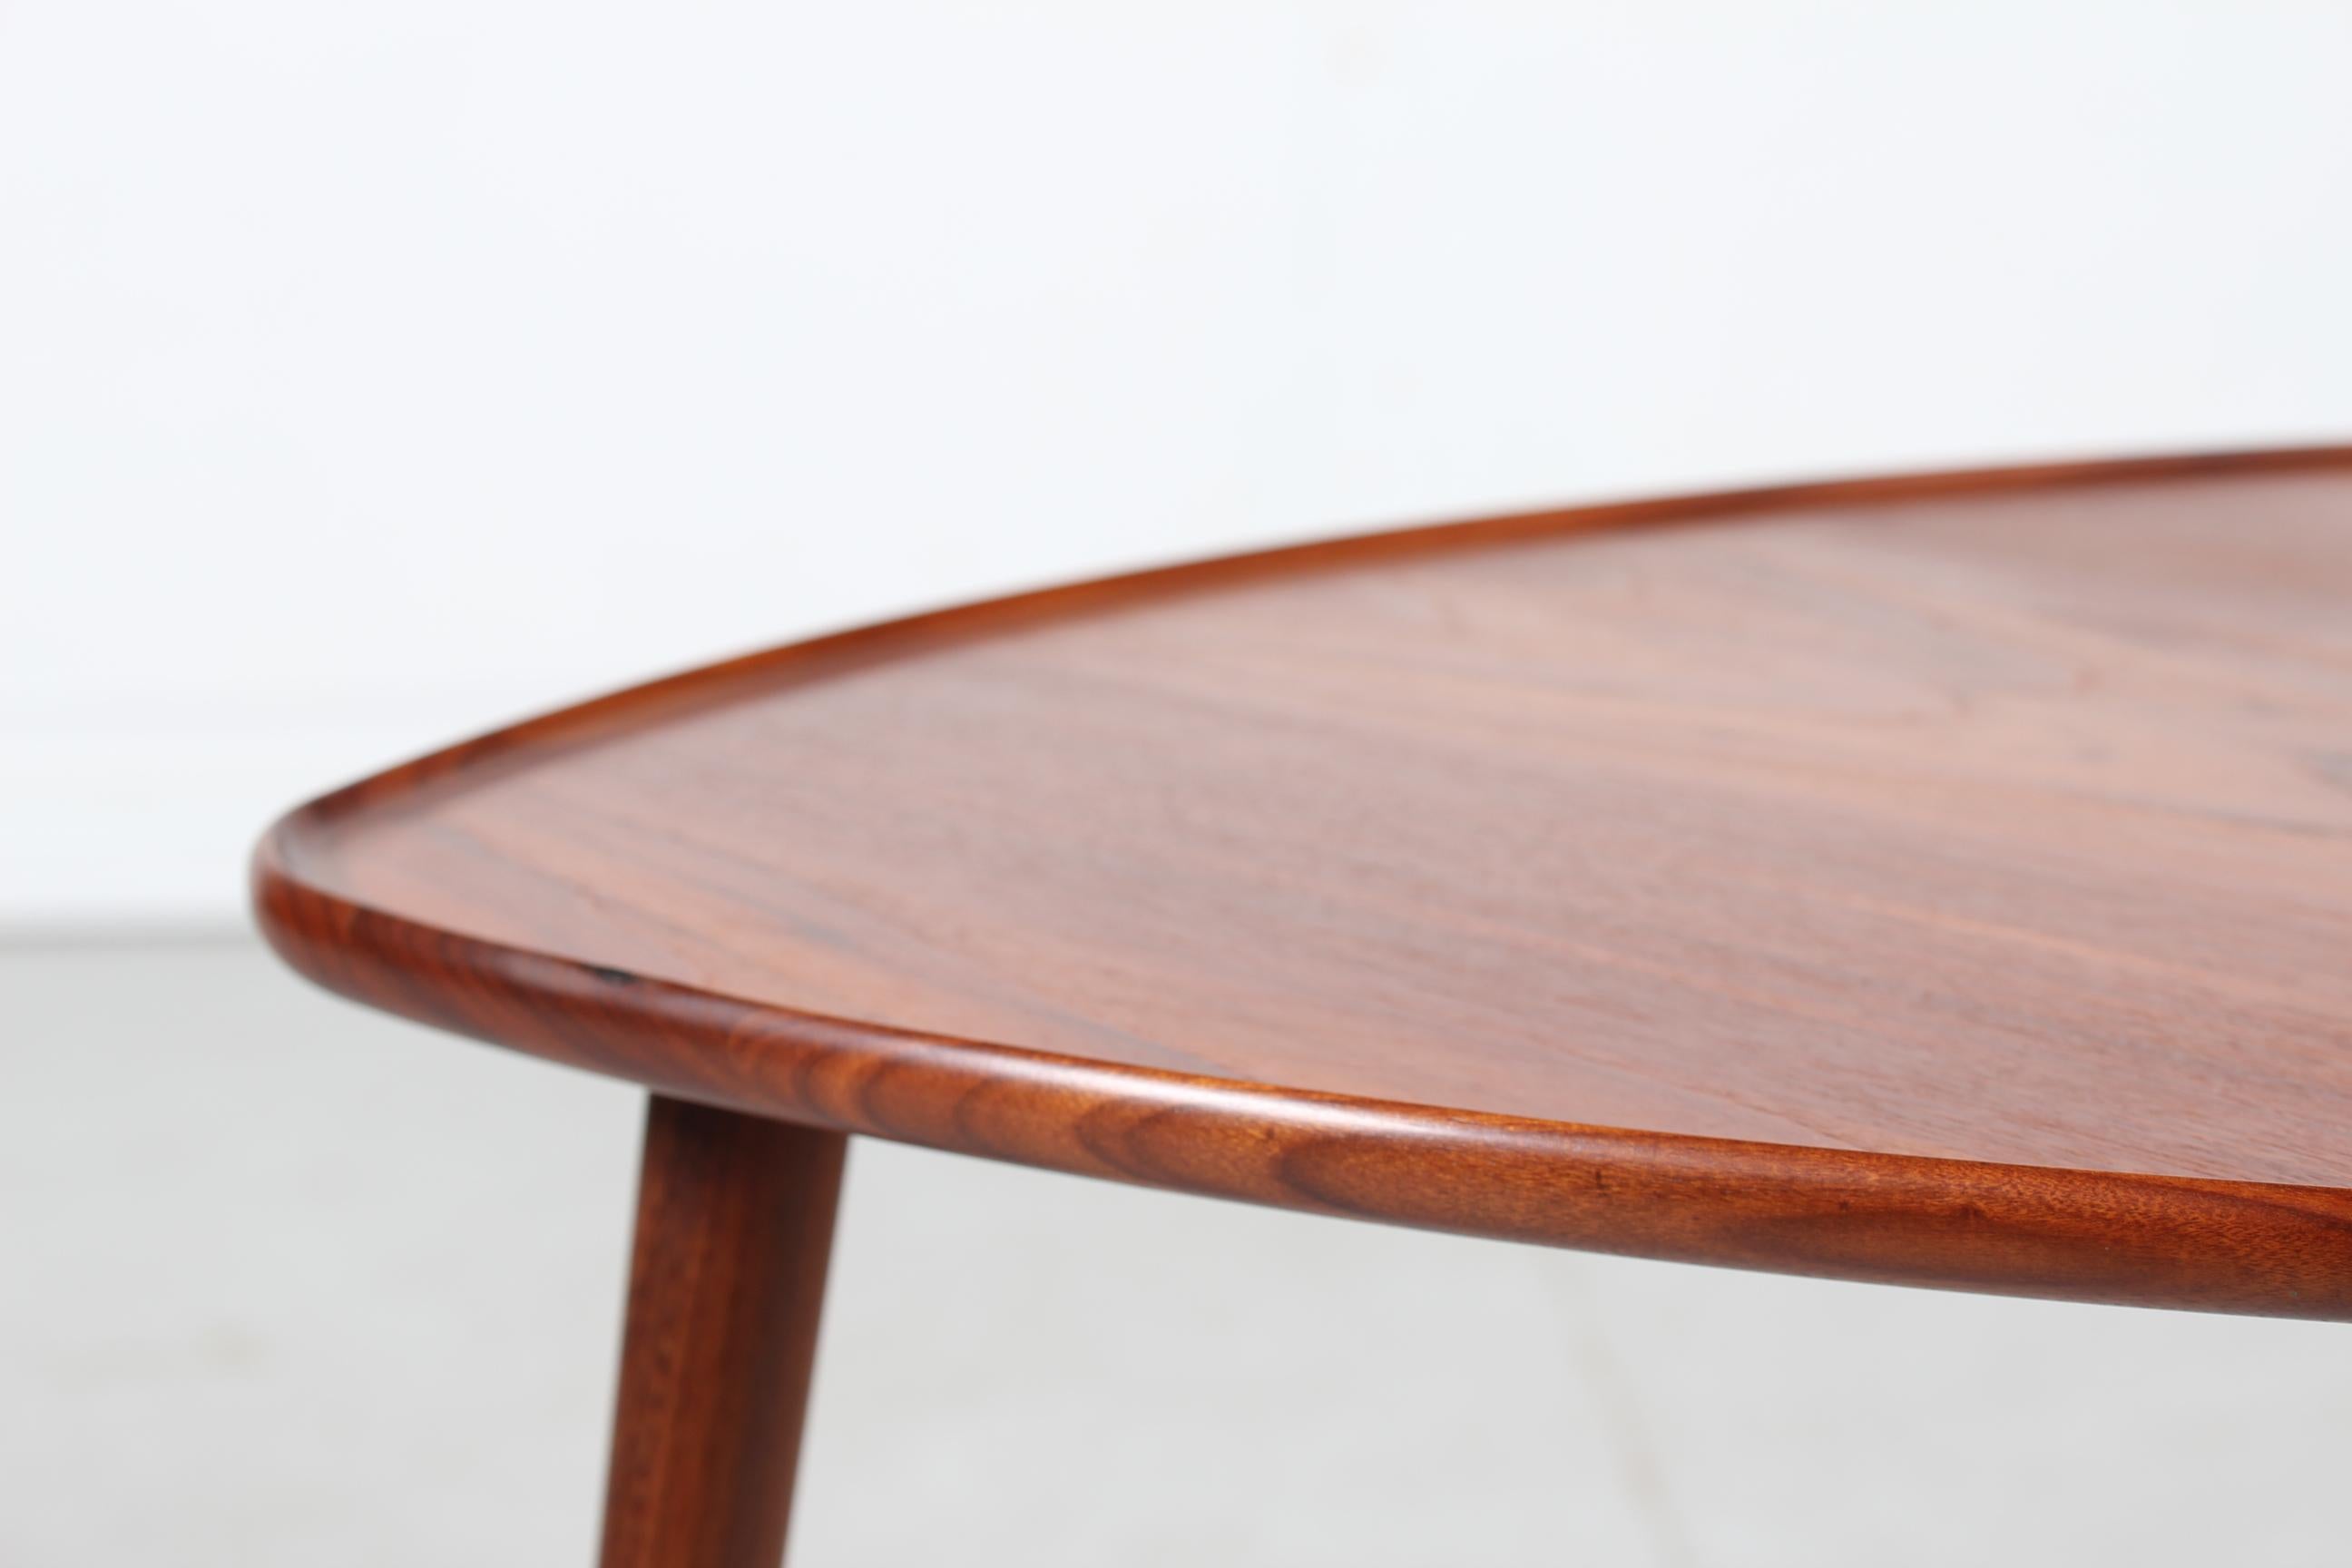 Anton Kildeberg organically shaped coffee table manufactured by Odense Møbelfabrik in 1968.
The table has a beautiful shape with a raised rim along the sides. It is made of solid teak and teak veneer with oil treatment. The legs are round and